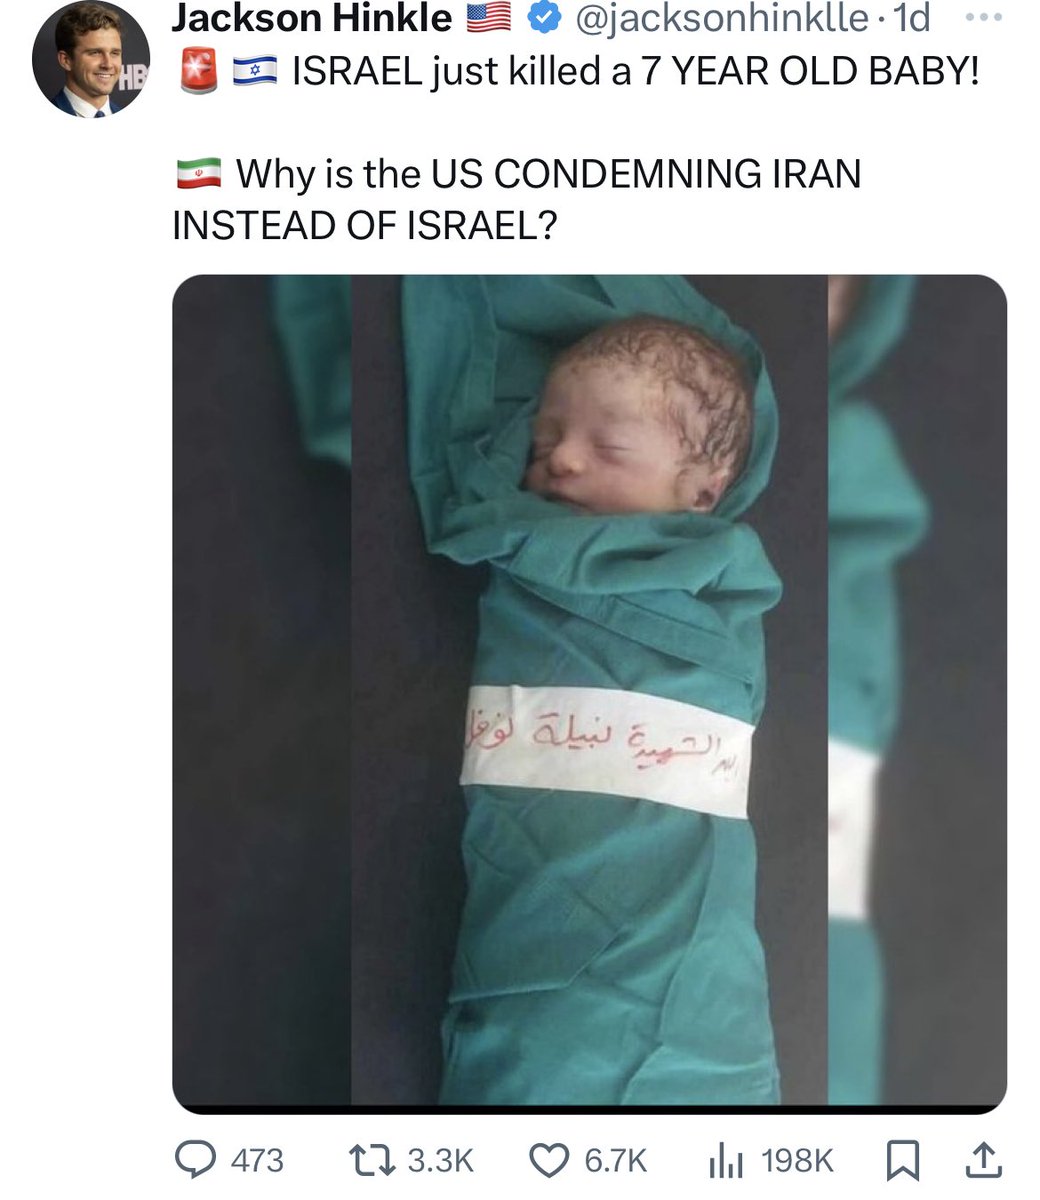 It takes a Zionist to kill a seven-year-old baby, I guess.